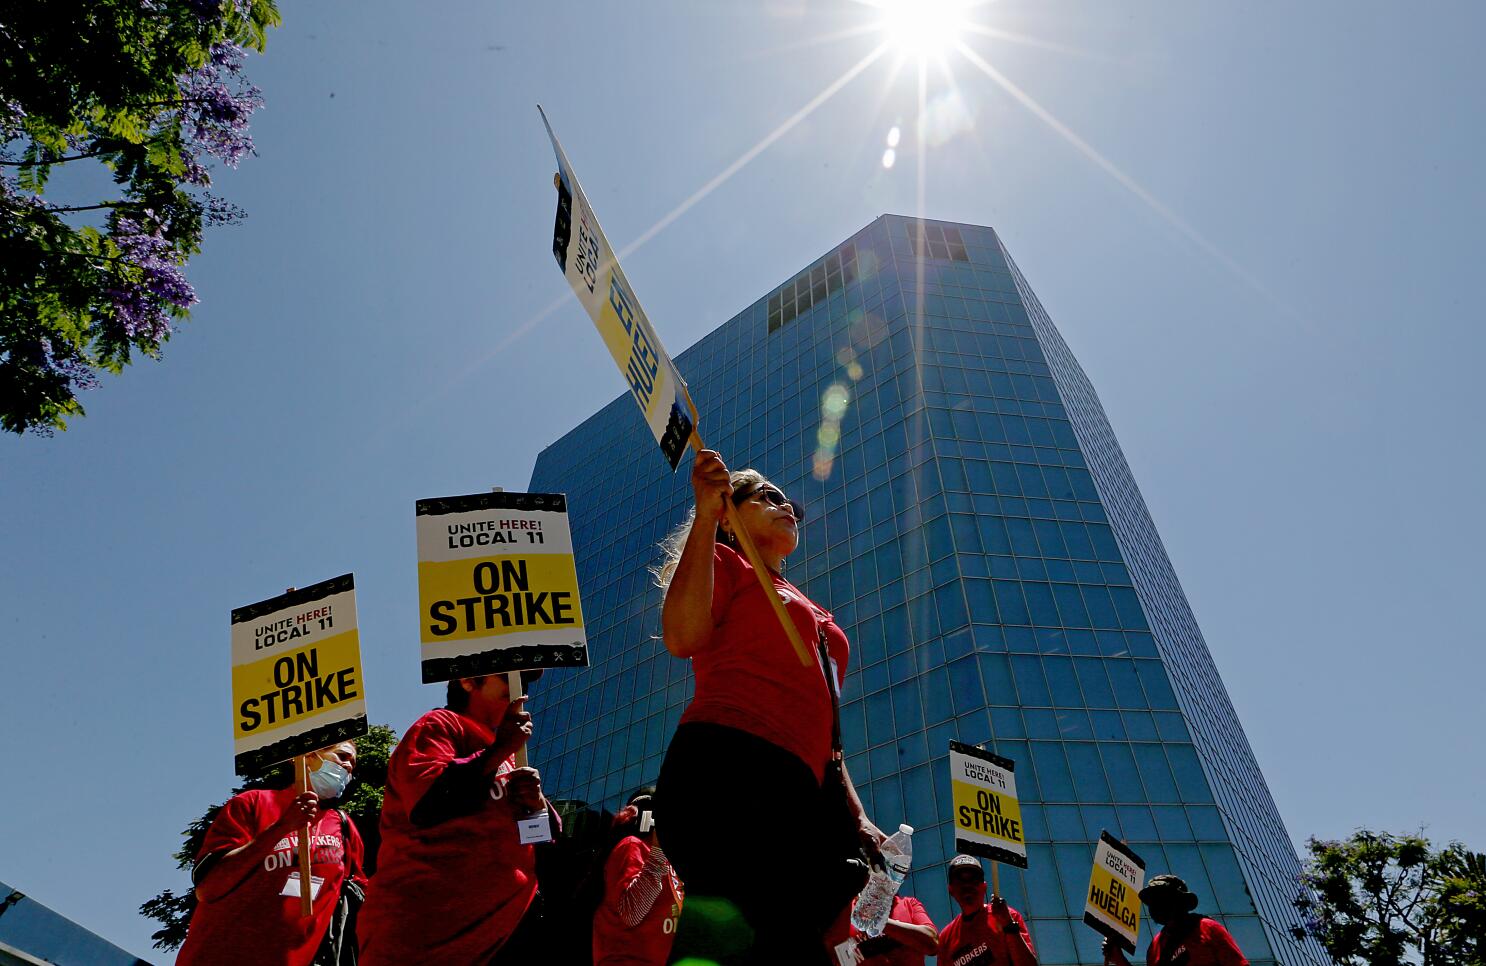 Los Angeles Hotel Workers Go on Strike - The New York Times